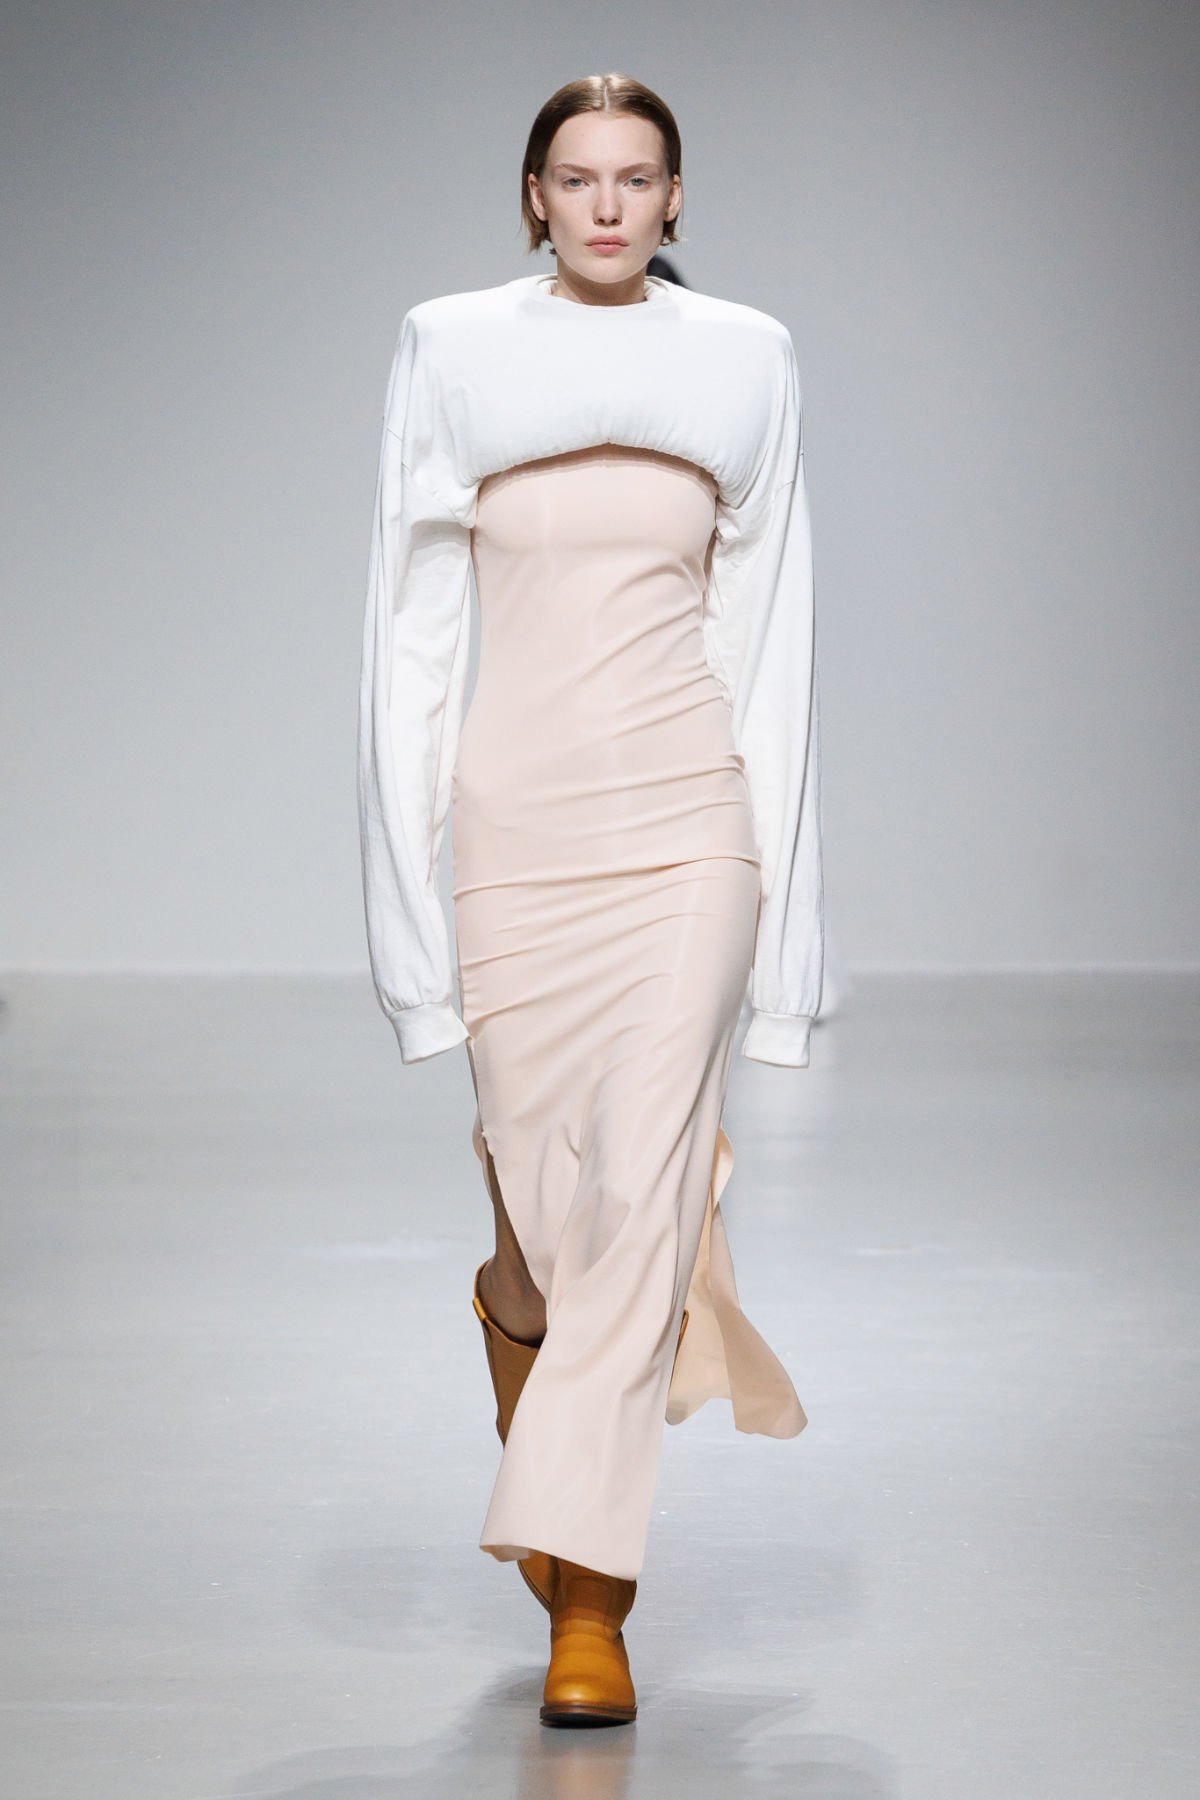 Duran Lantink Presents Its New Spring/Summer 2024 Collection ...